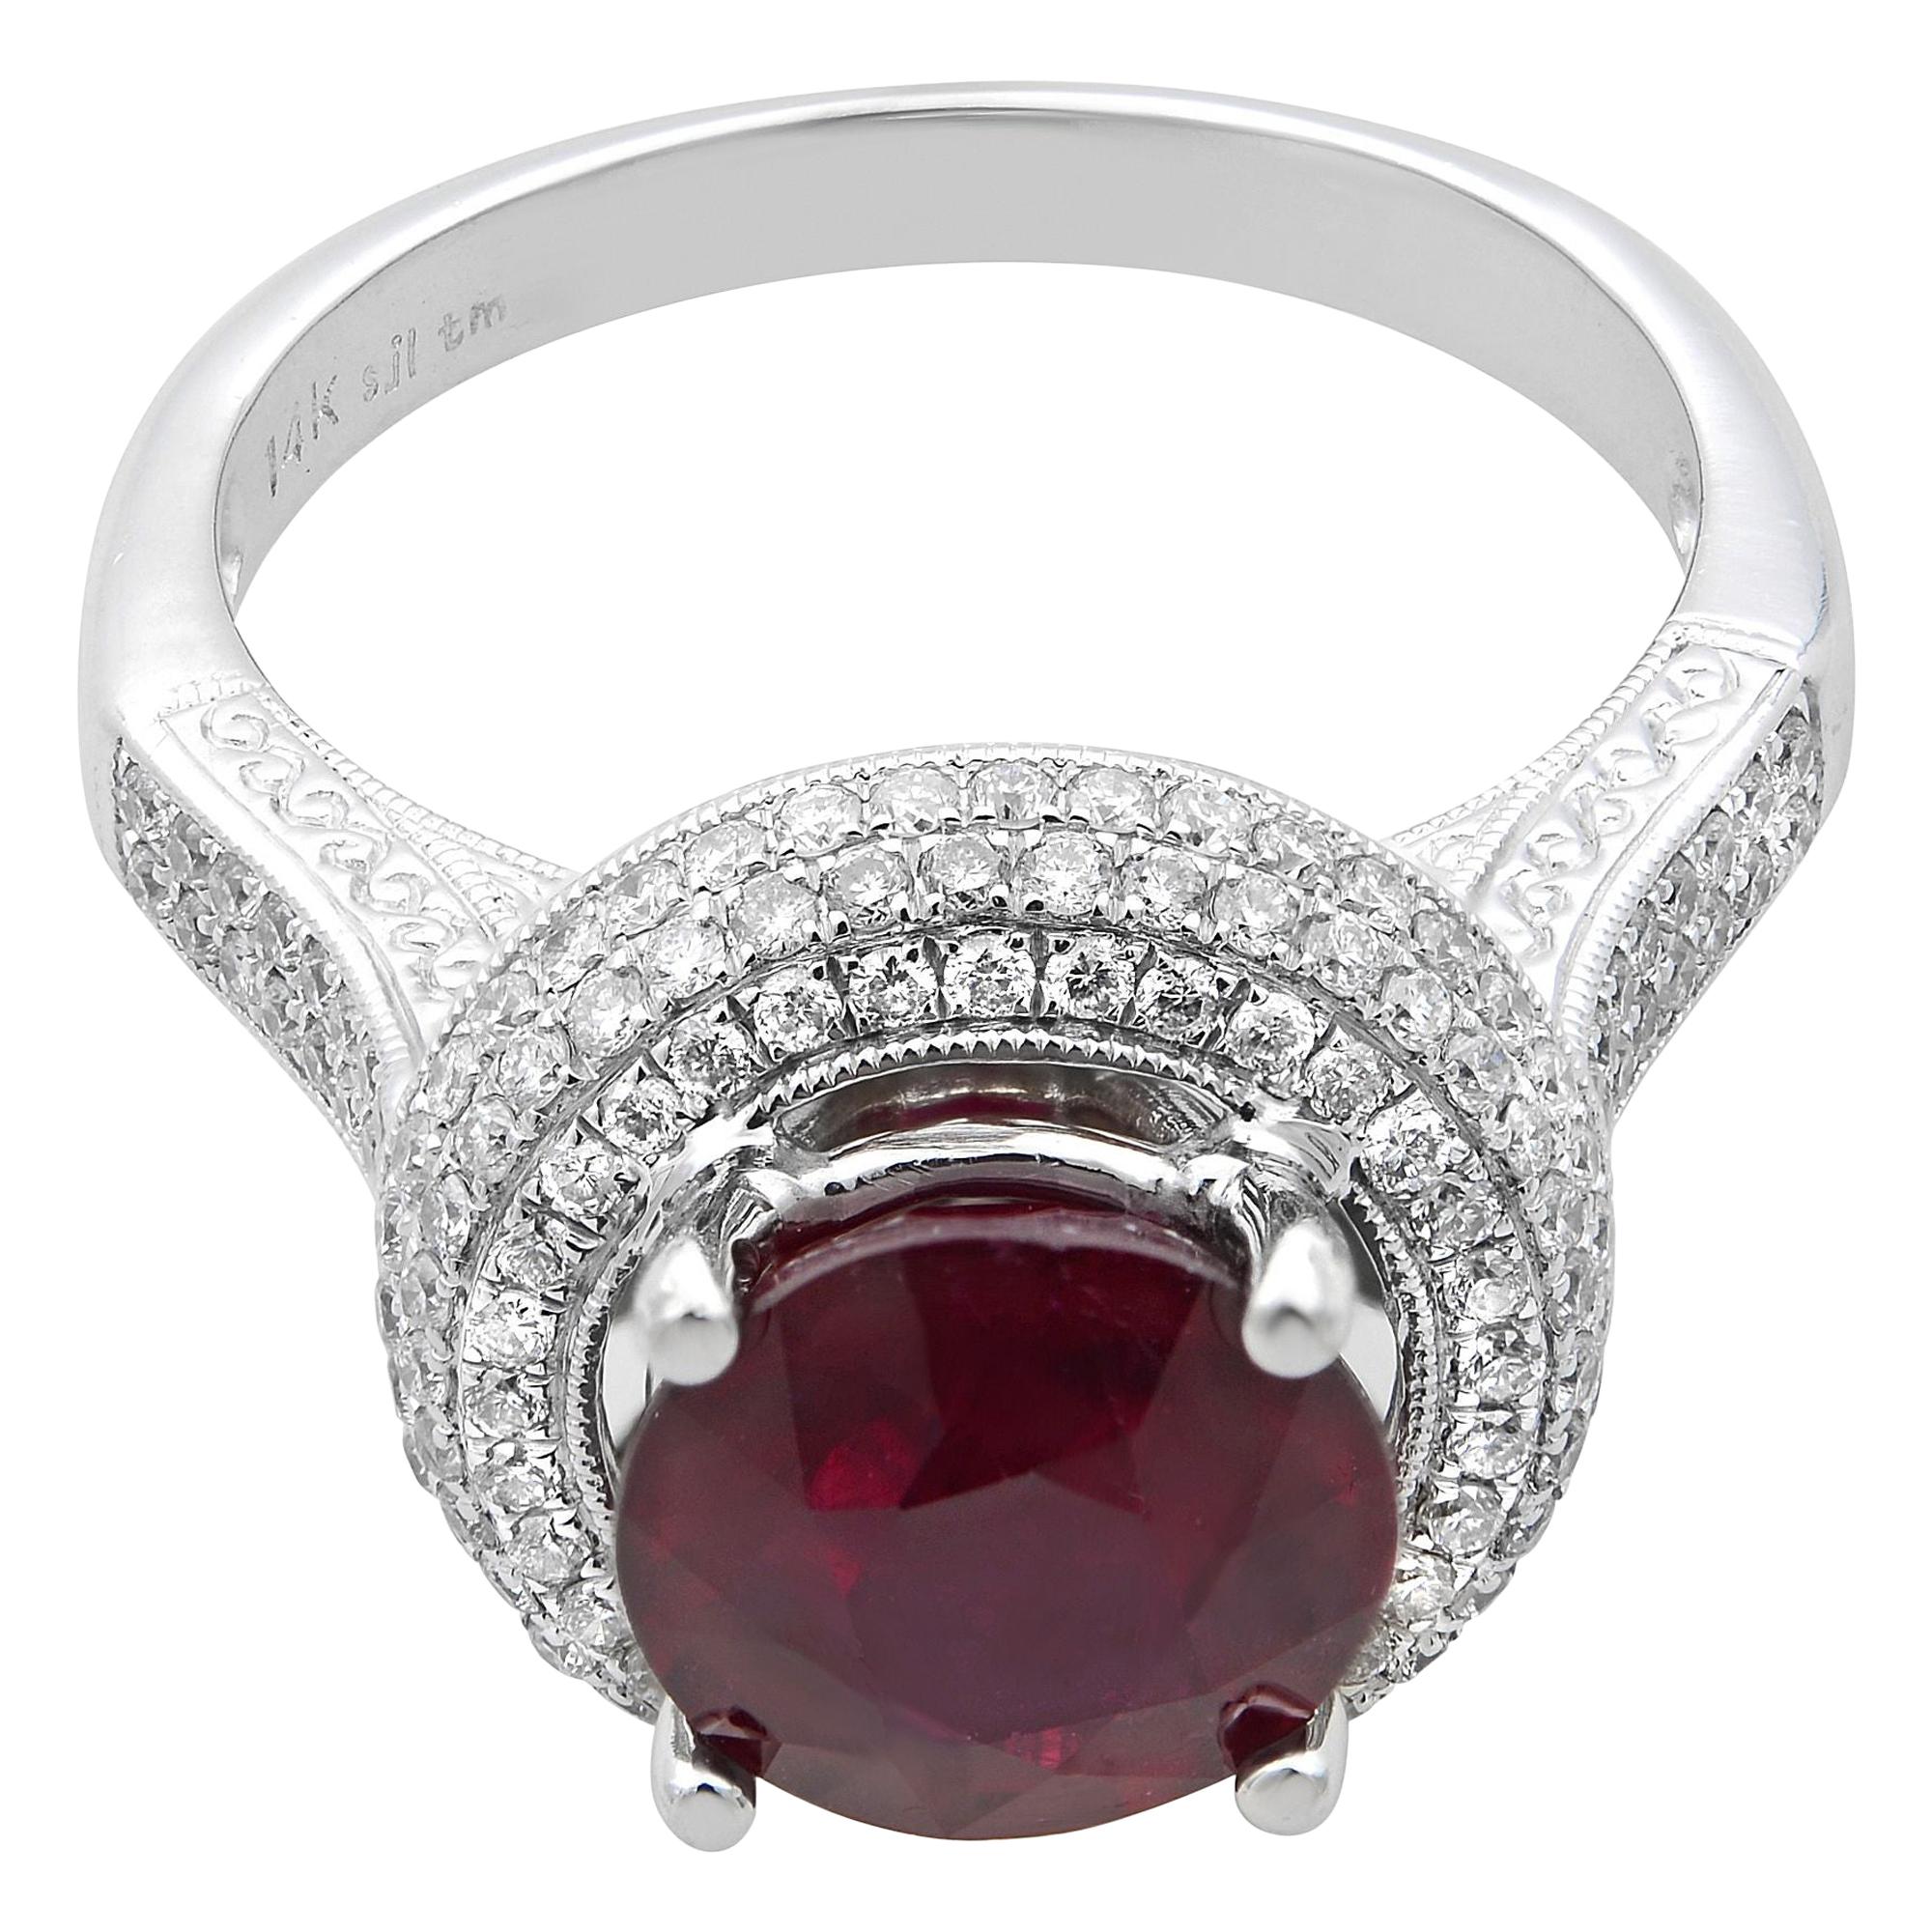 This beautiful round ruby and diamond engagement ring is crafted in fine 14k white gold. An excellent prong set round cut ruby is flanked as a center stone with tiny round cut diamonds weighing 0.75 carat. Ring Size 7.75. Total weight: 6 gms. Comes